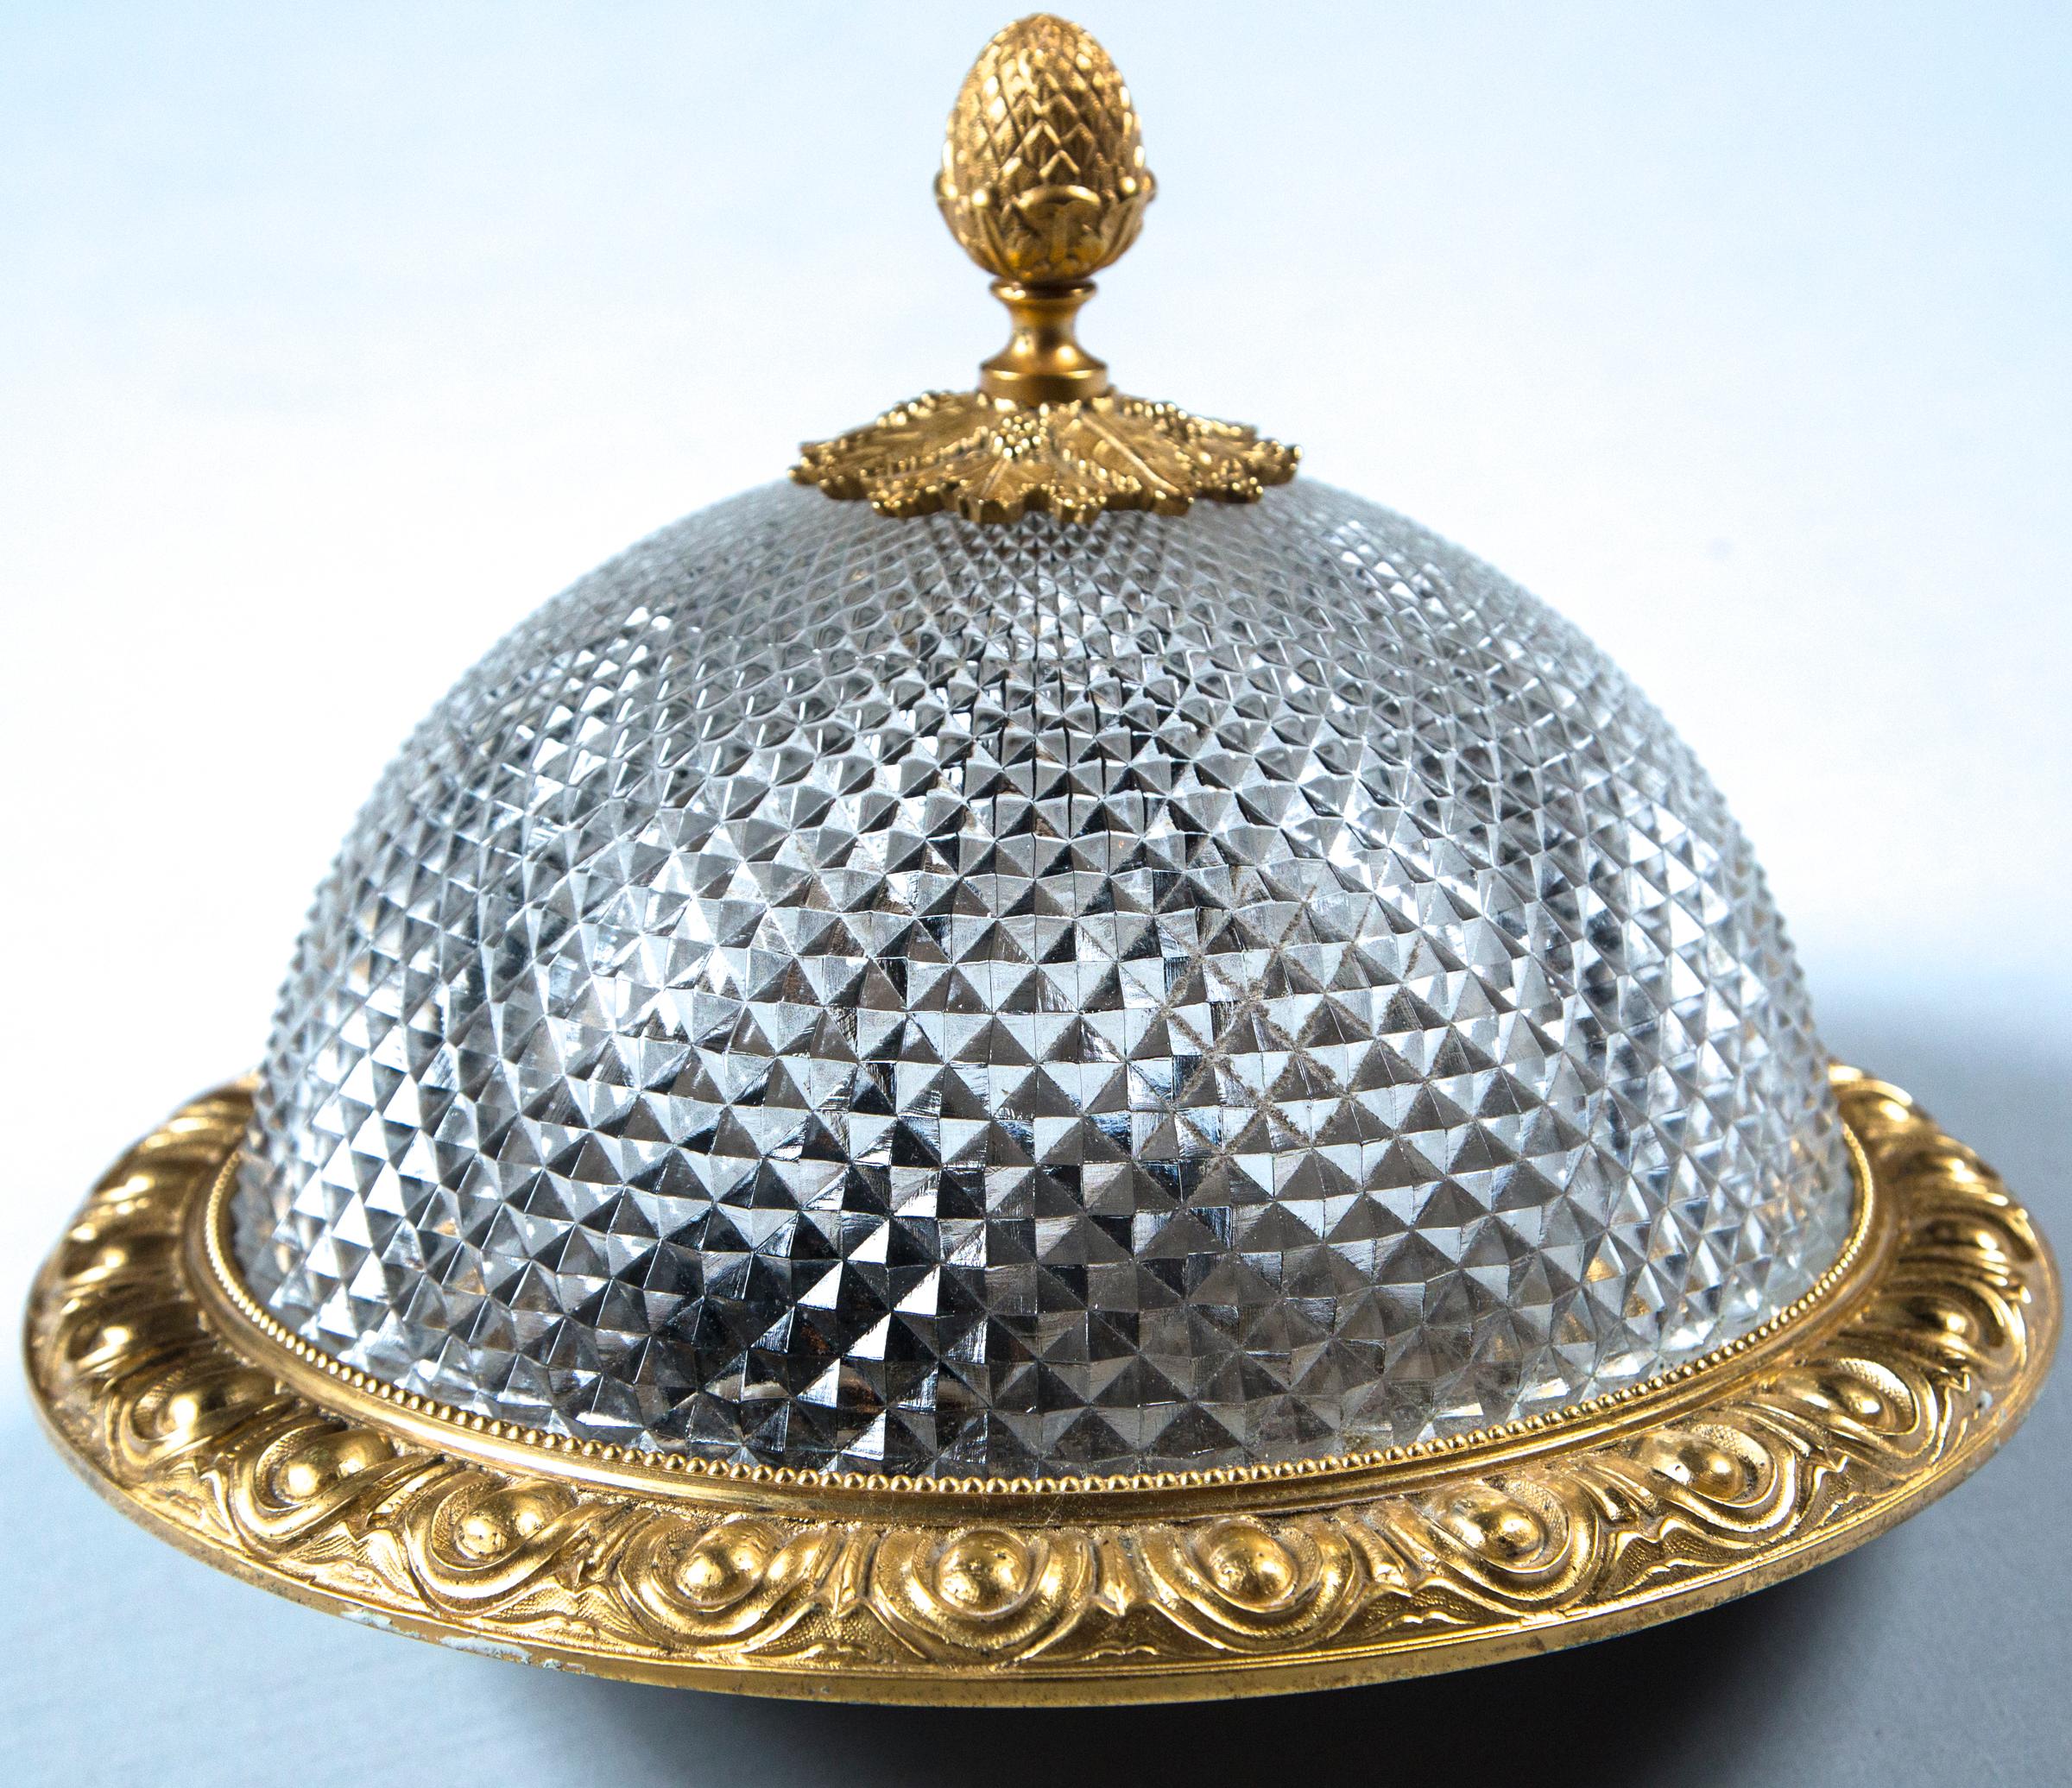 1940s Baccarat diamond cut brilliant crystal ceiling fixture with gilt gold Ormolu bronze mounts and original acorn finial. Measuring 12.5 inches diameter and 8